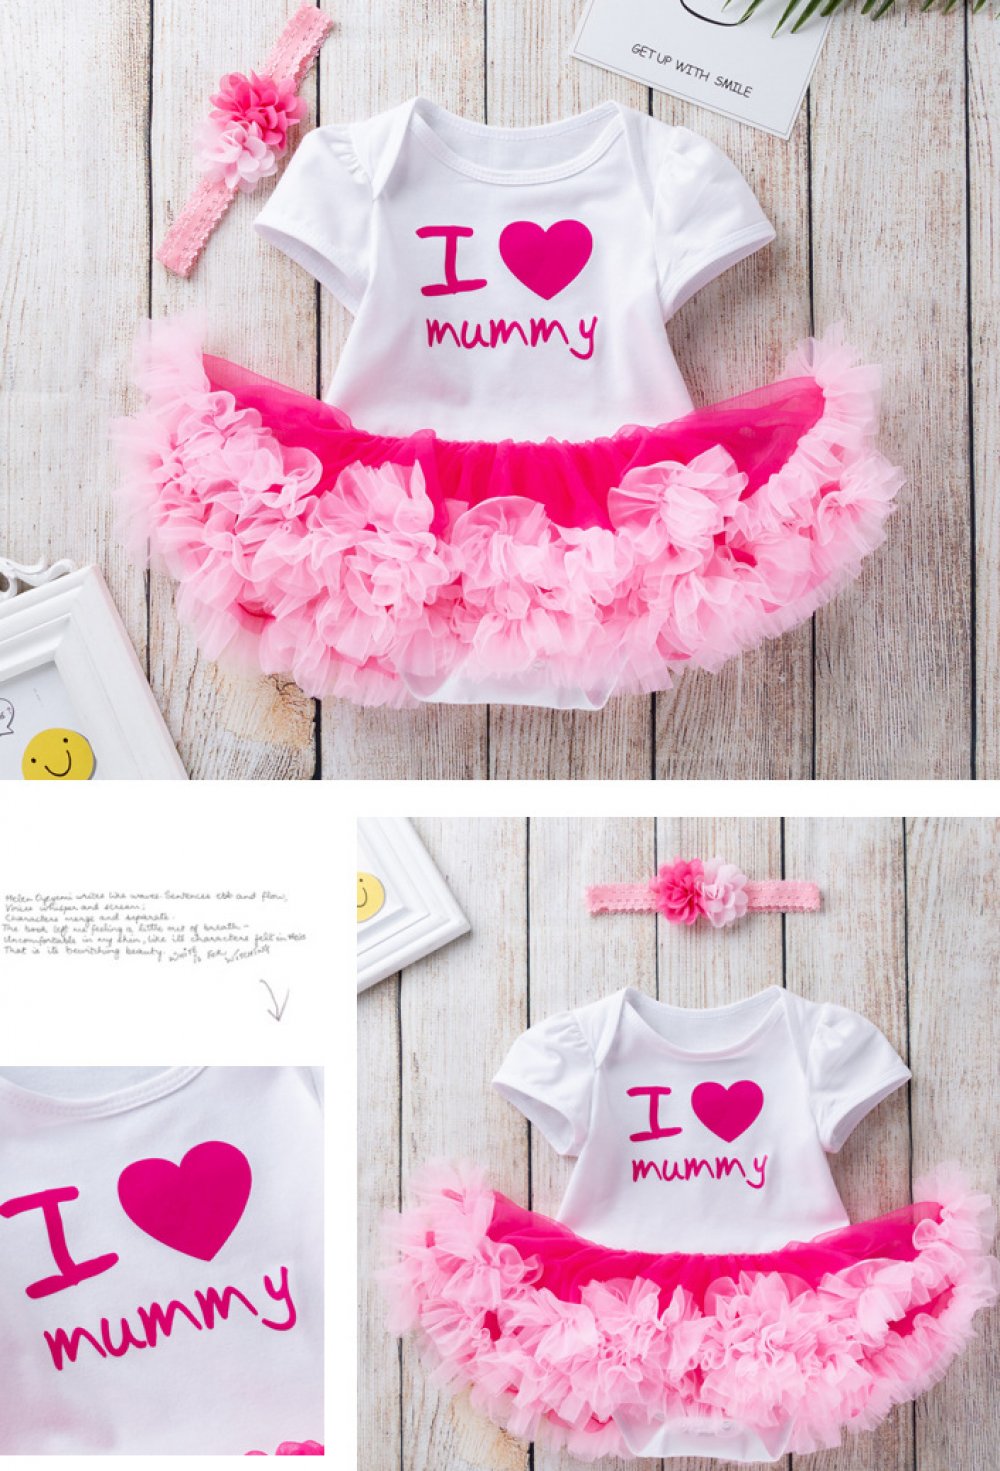 Best Selling Mother's Day Baby Clothes 0-2 Y  Baby Children's Skirt Soft Yarn Romper Skirt Headdress Two-piece Set Wholesale Baby Clothes